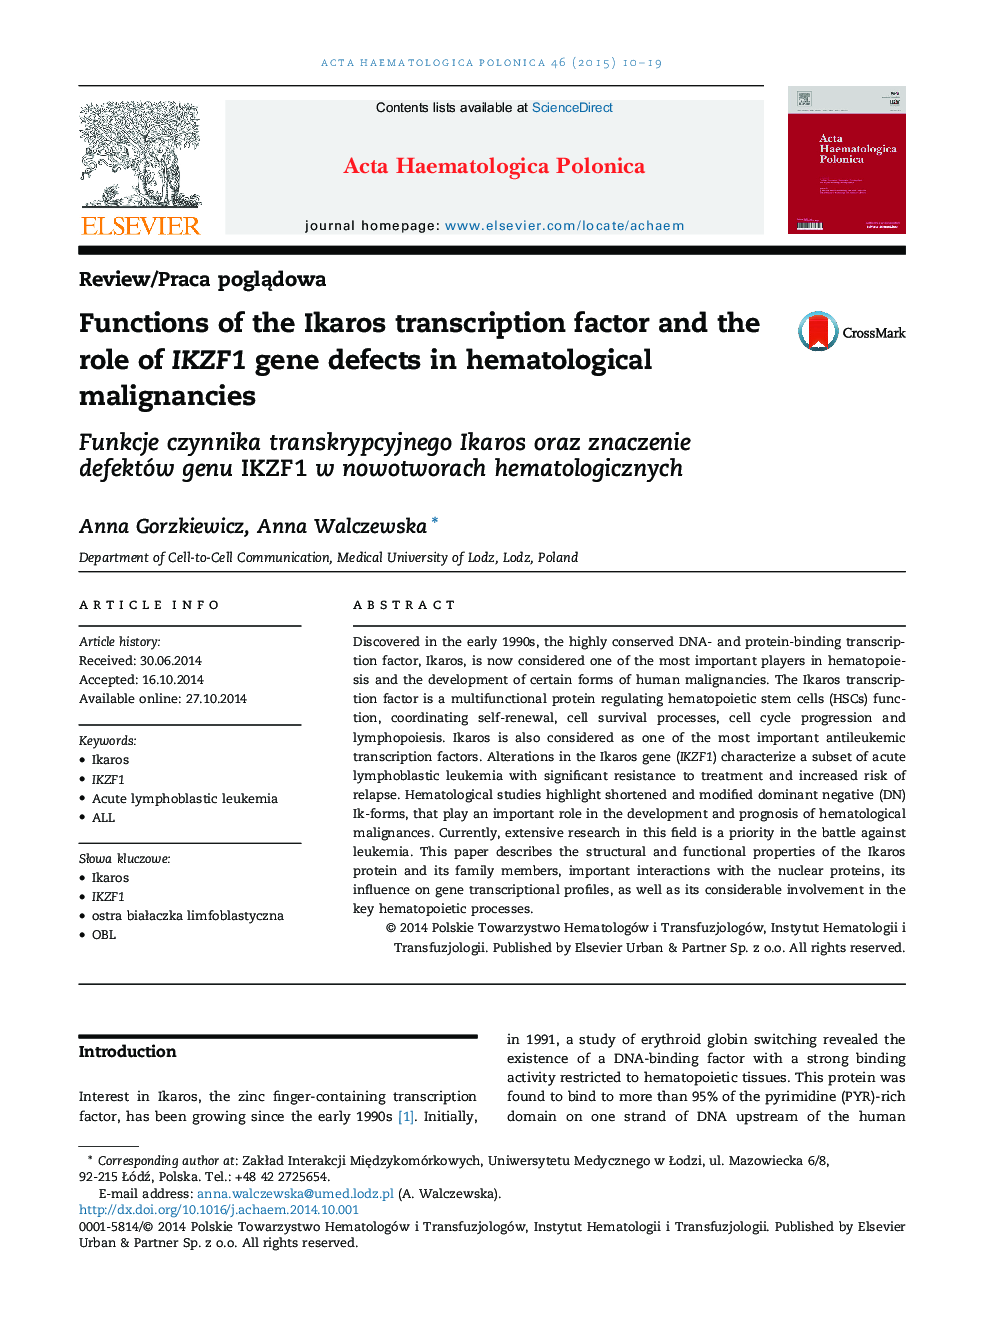 Functions of the Ikaros transcription factor and the role of IKZF1 gene defects in hematological malignancies